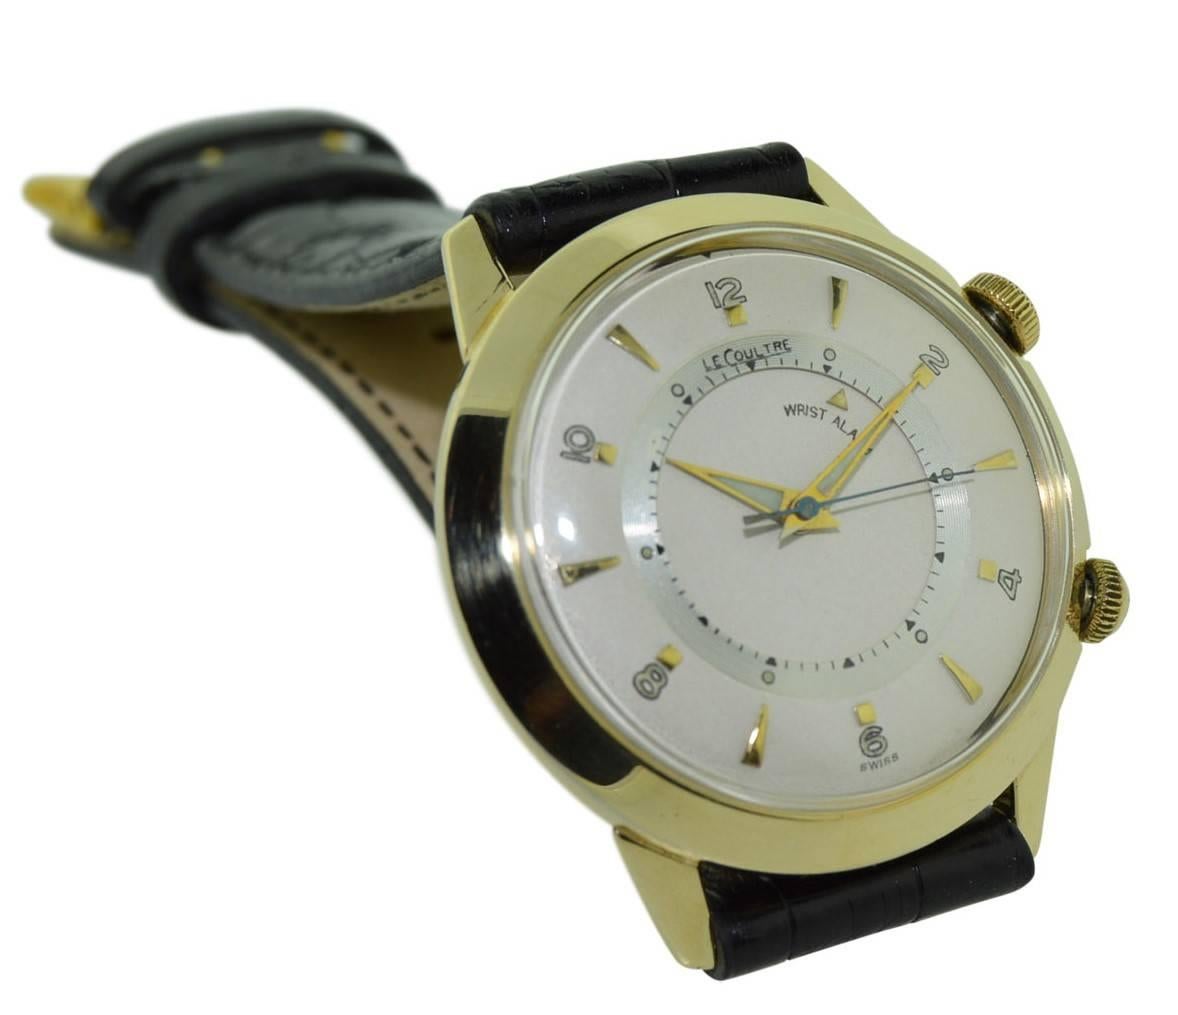 FACTORY / HOUSE: Le Coultre Watch Company
STYLE / REFERENCE: Round / Alarm
METAL / MATERIAL: 14Kt. Yellow Gold Filled / Steel Screw Back
CIRCA: 1960's
DIMENSIONS: 40mm X 35mm
MOVEMENT / CALIBER: Manual Winding / 17 Jewels / Cal. 814
DIAL / HANDS: